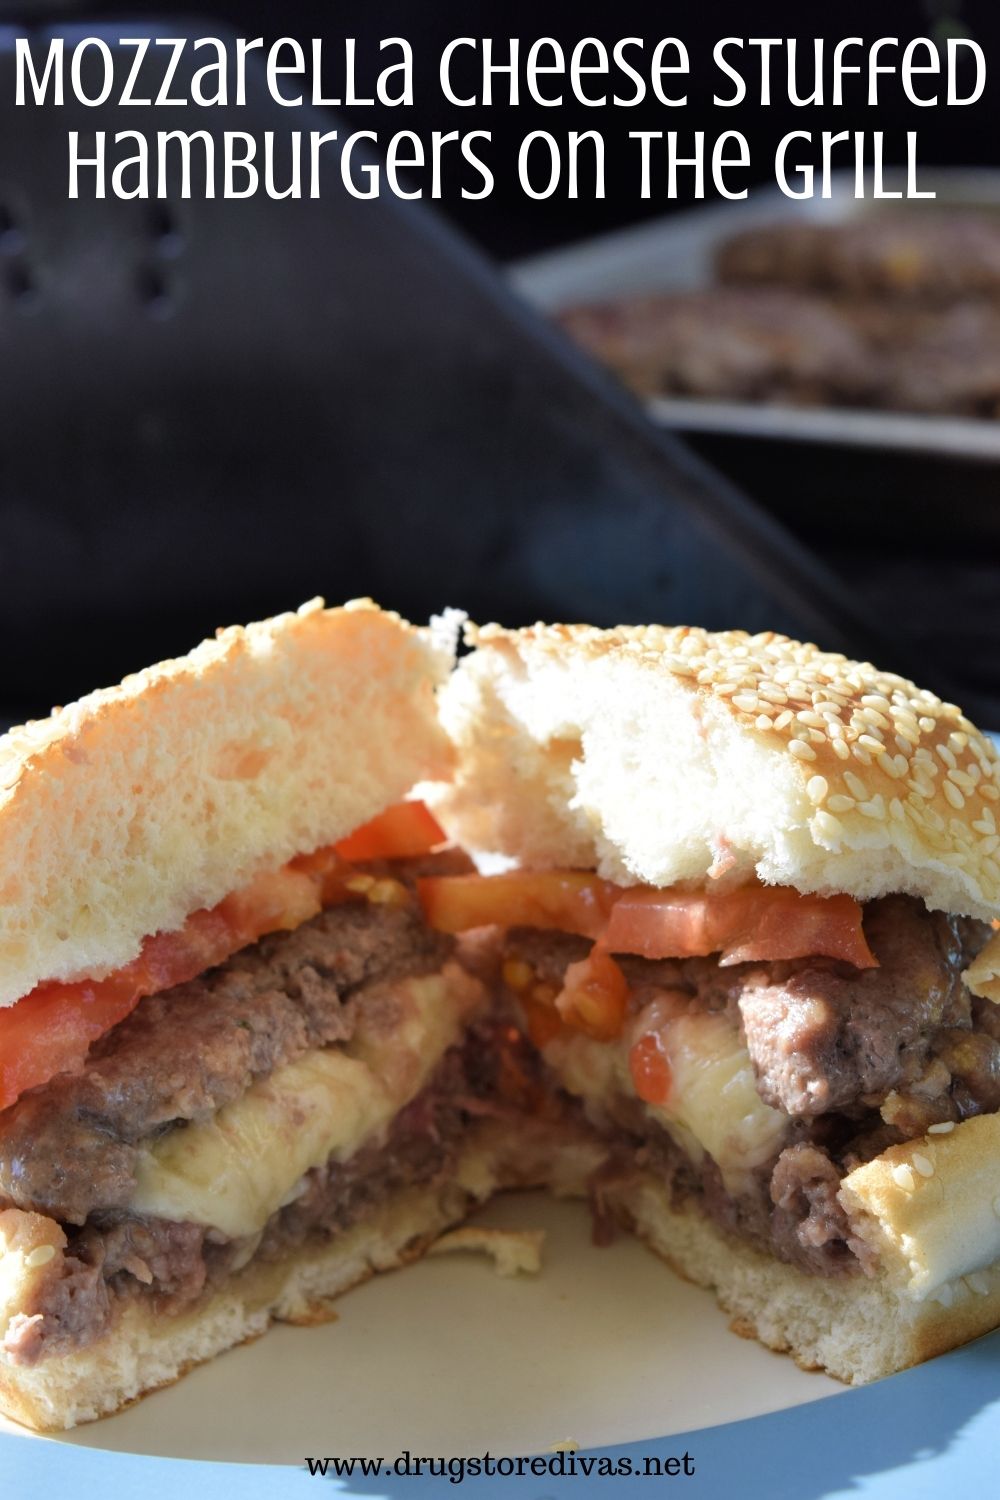 This Mozzarella Cheese Stuffed Hamburgers On The Grill recipe is the perfect twist on a classic summer burger recipe.